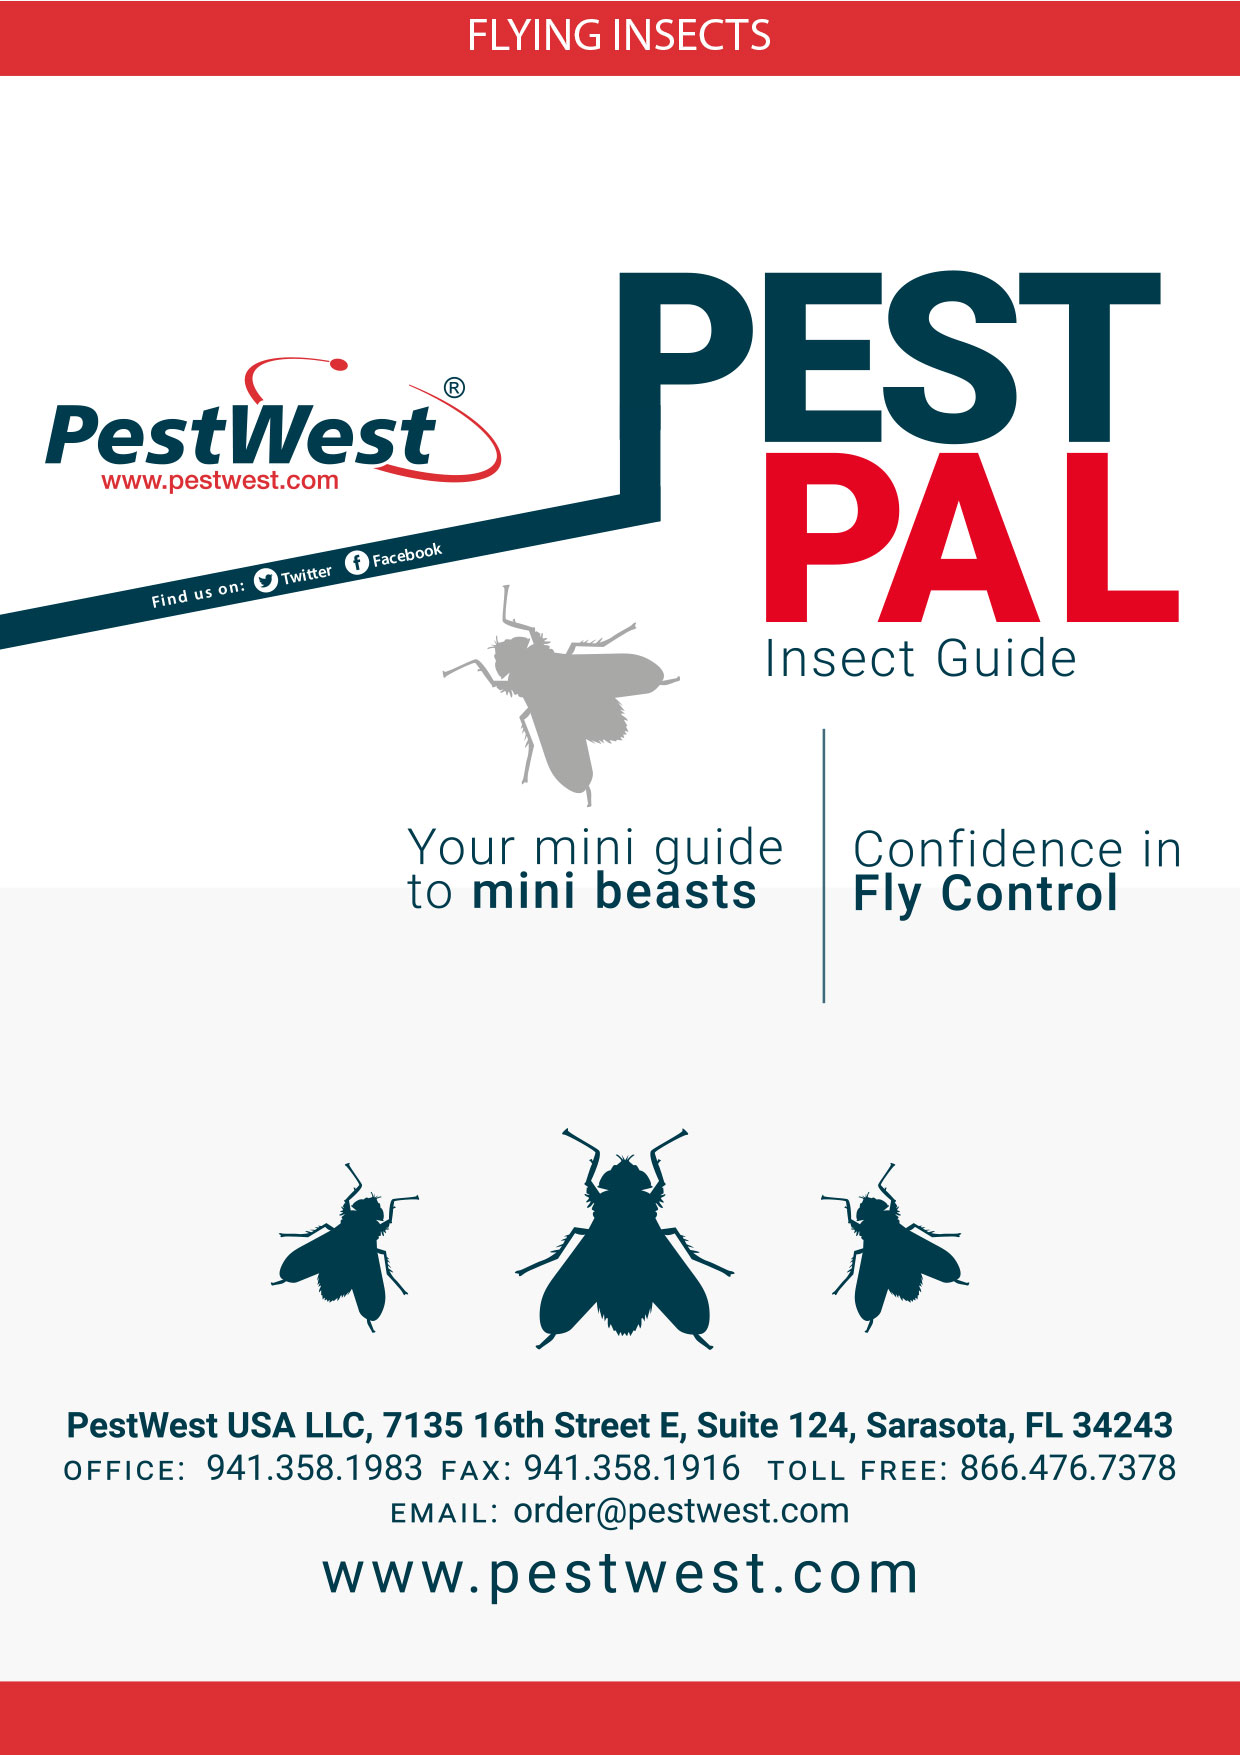 PestWest-Pest-Pal-Insect-Guide-1